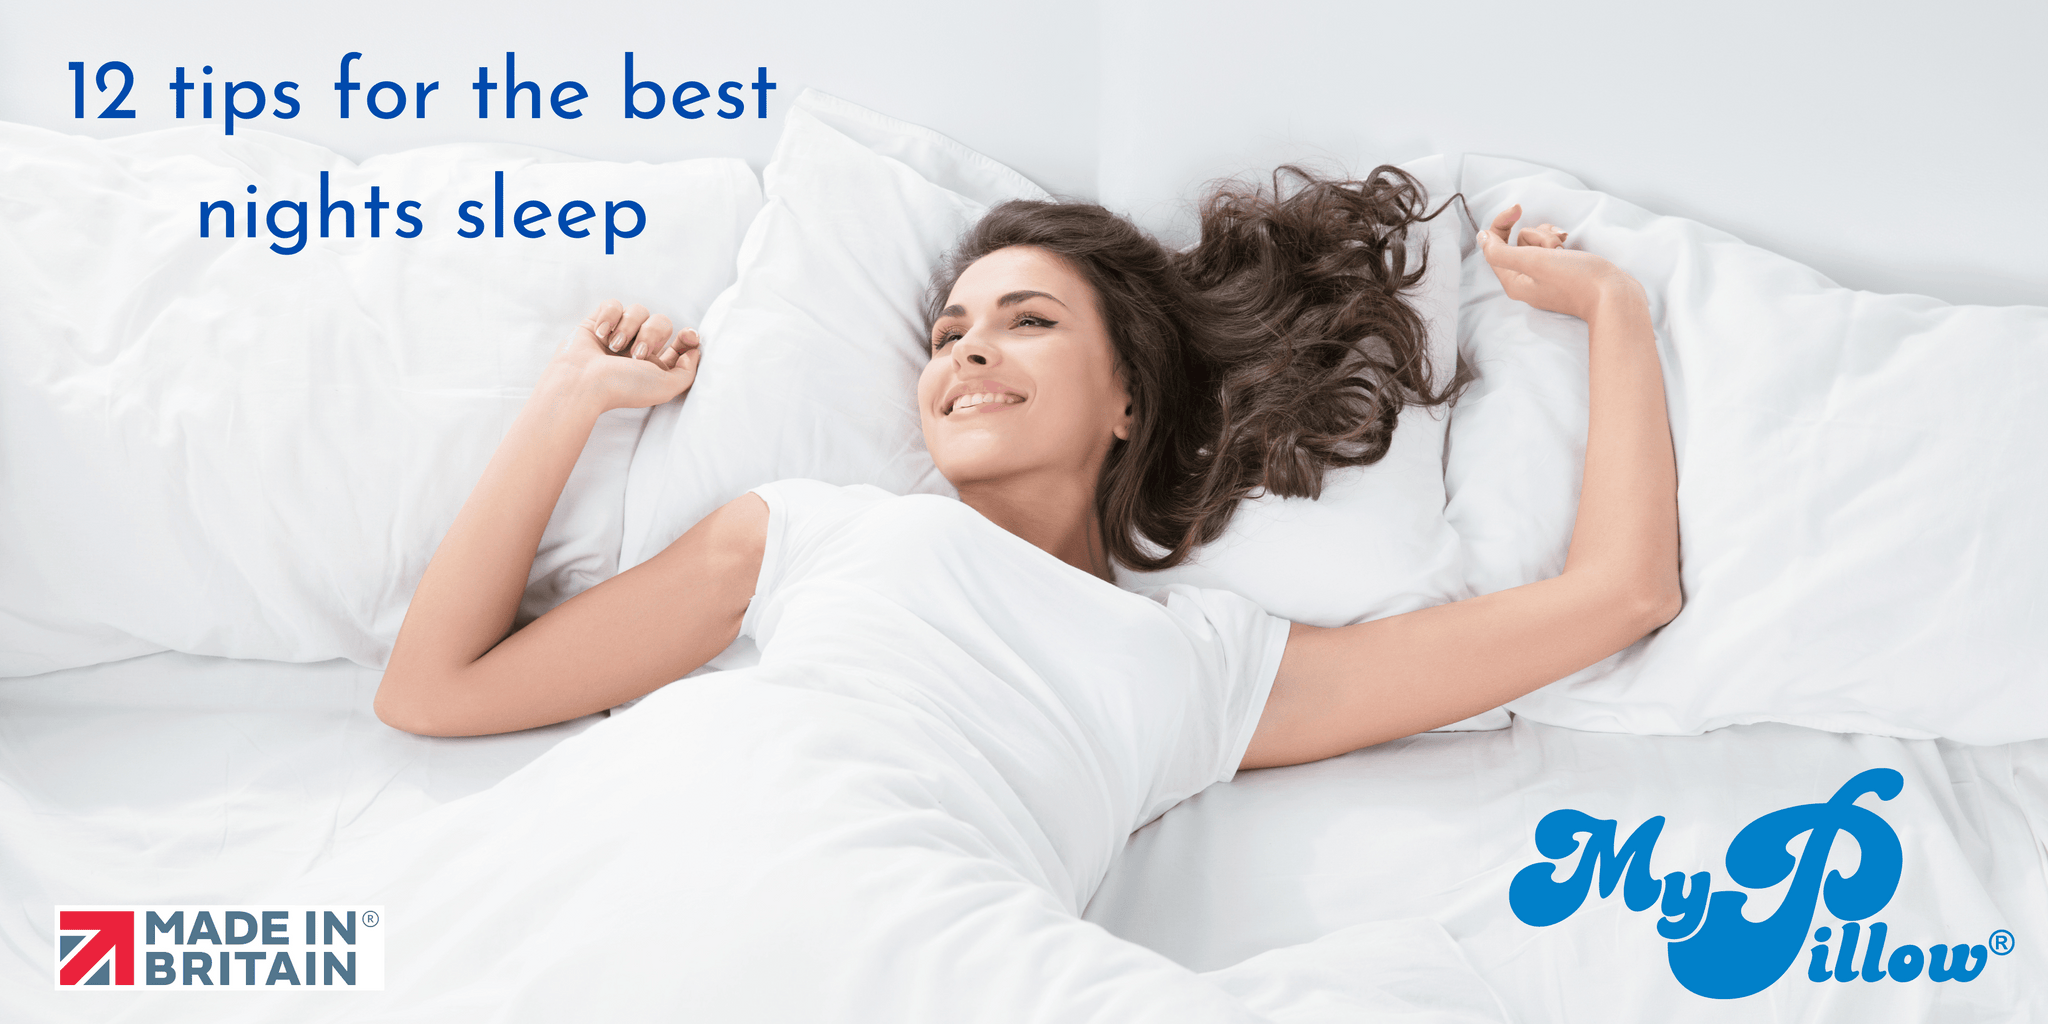 12 tips for the best nights sleep